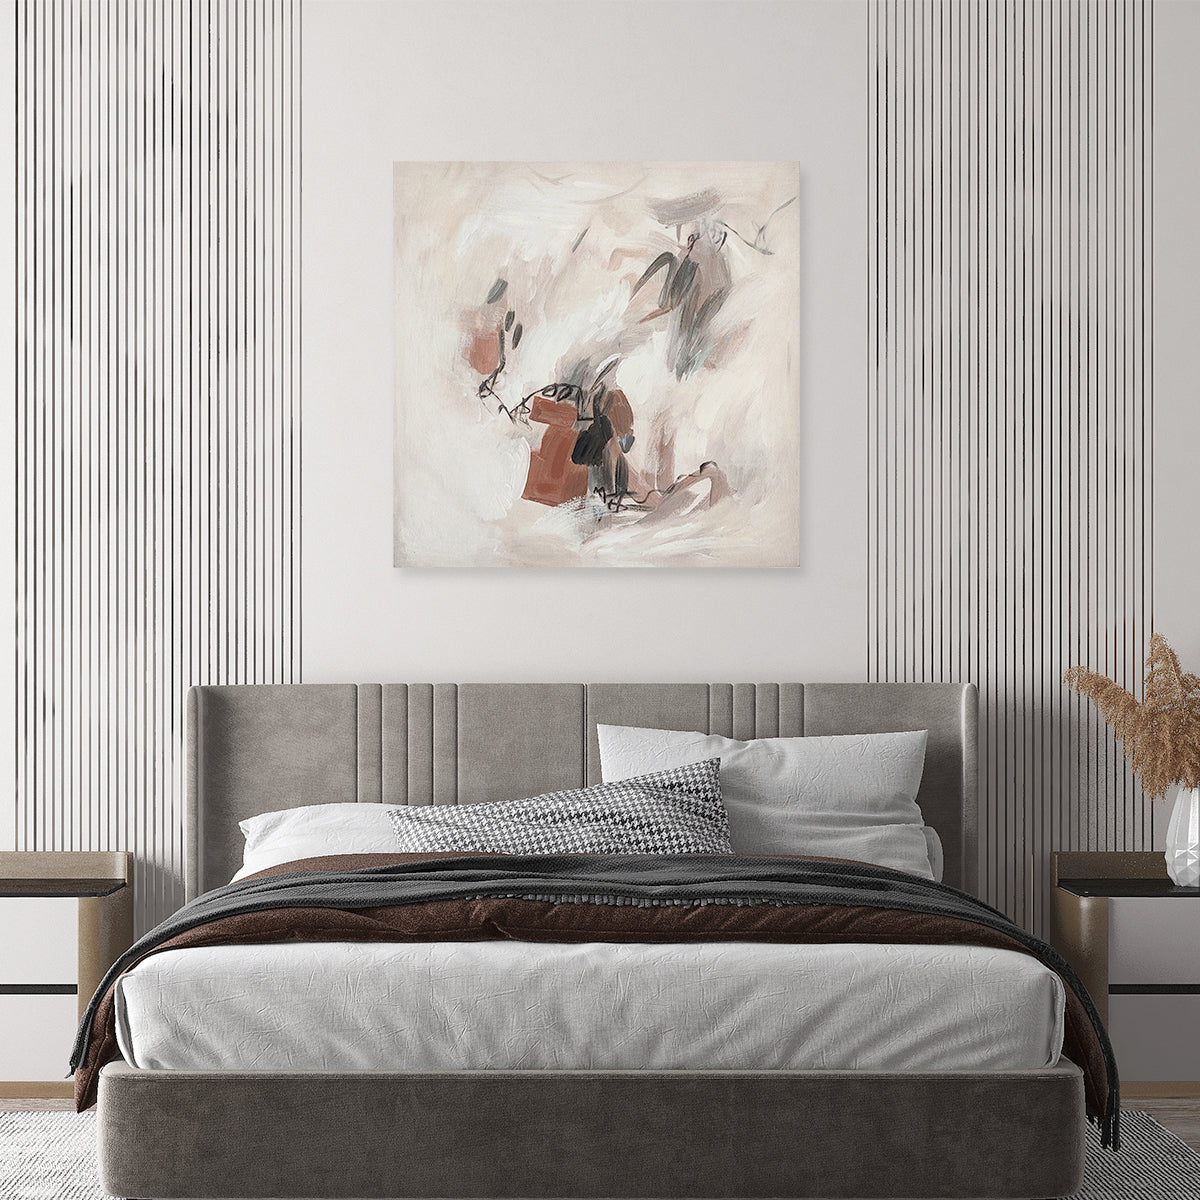 Abstract textured wall art affordable oil painting unframed brown square in bedroom